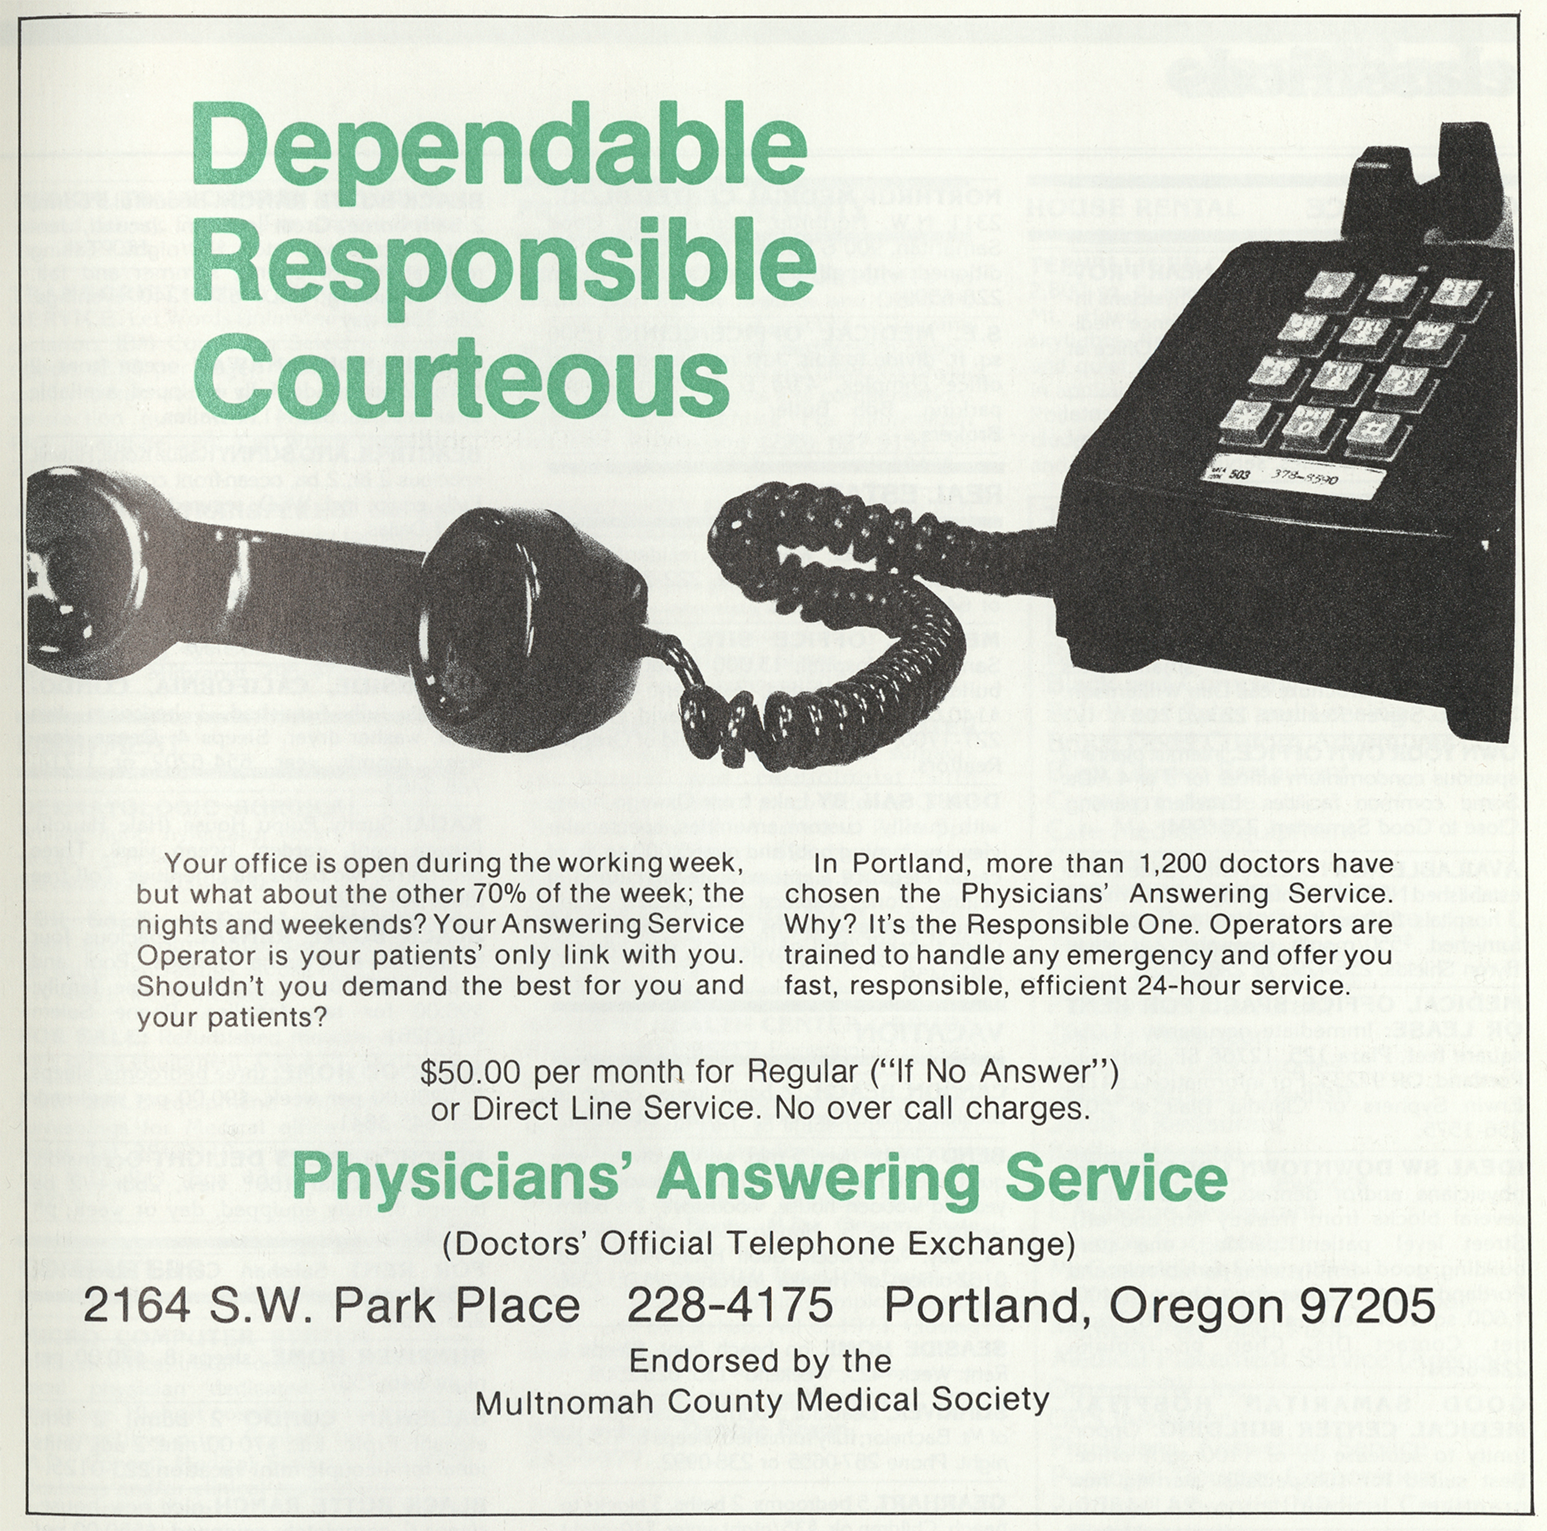 "Dependable, Responsible, Courteous" advertisement for the Physicians' Answering Service